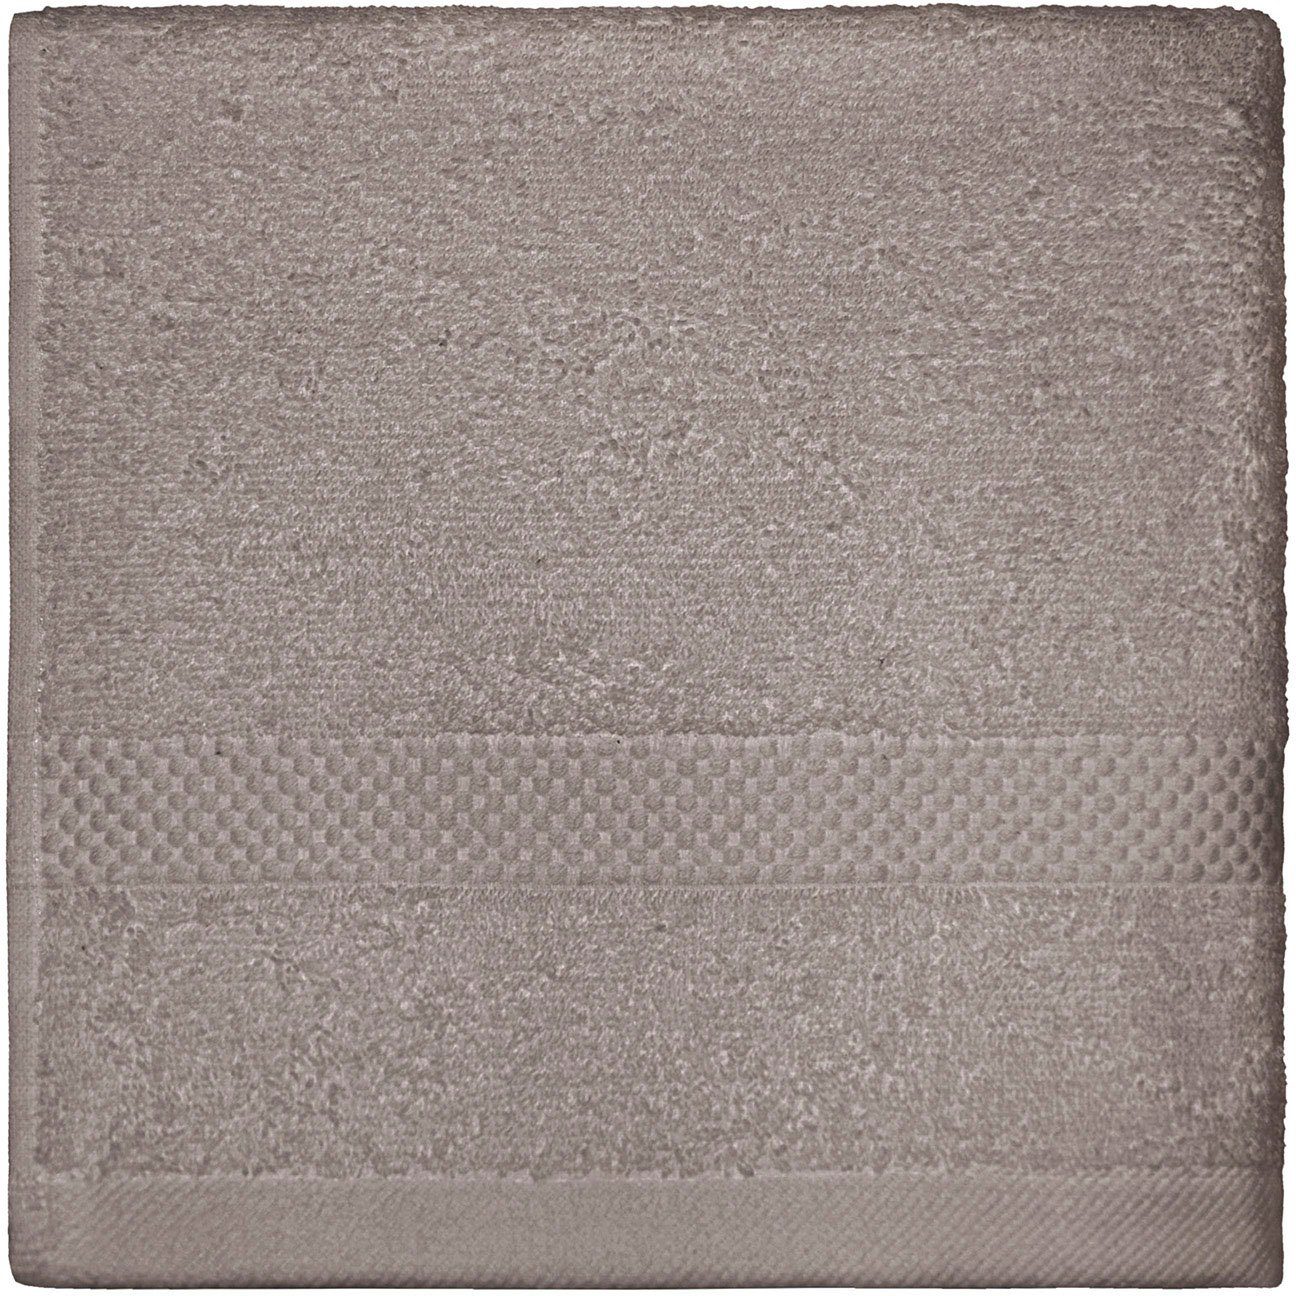 Dyckhoff (1-St) Planet, Duschtuch taupe Walkfrottier